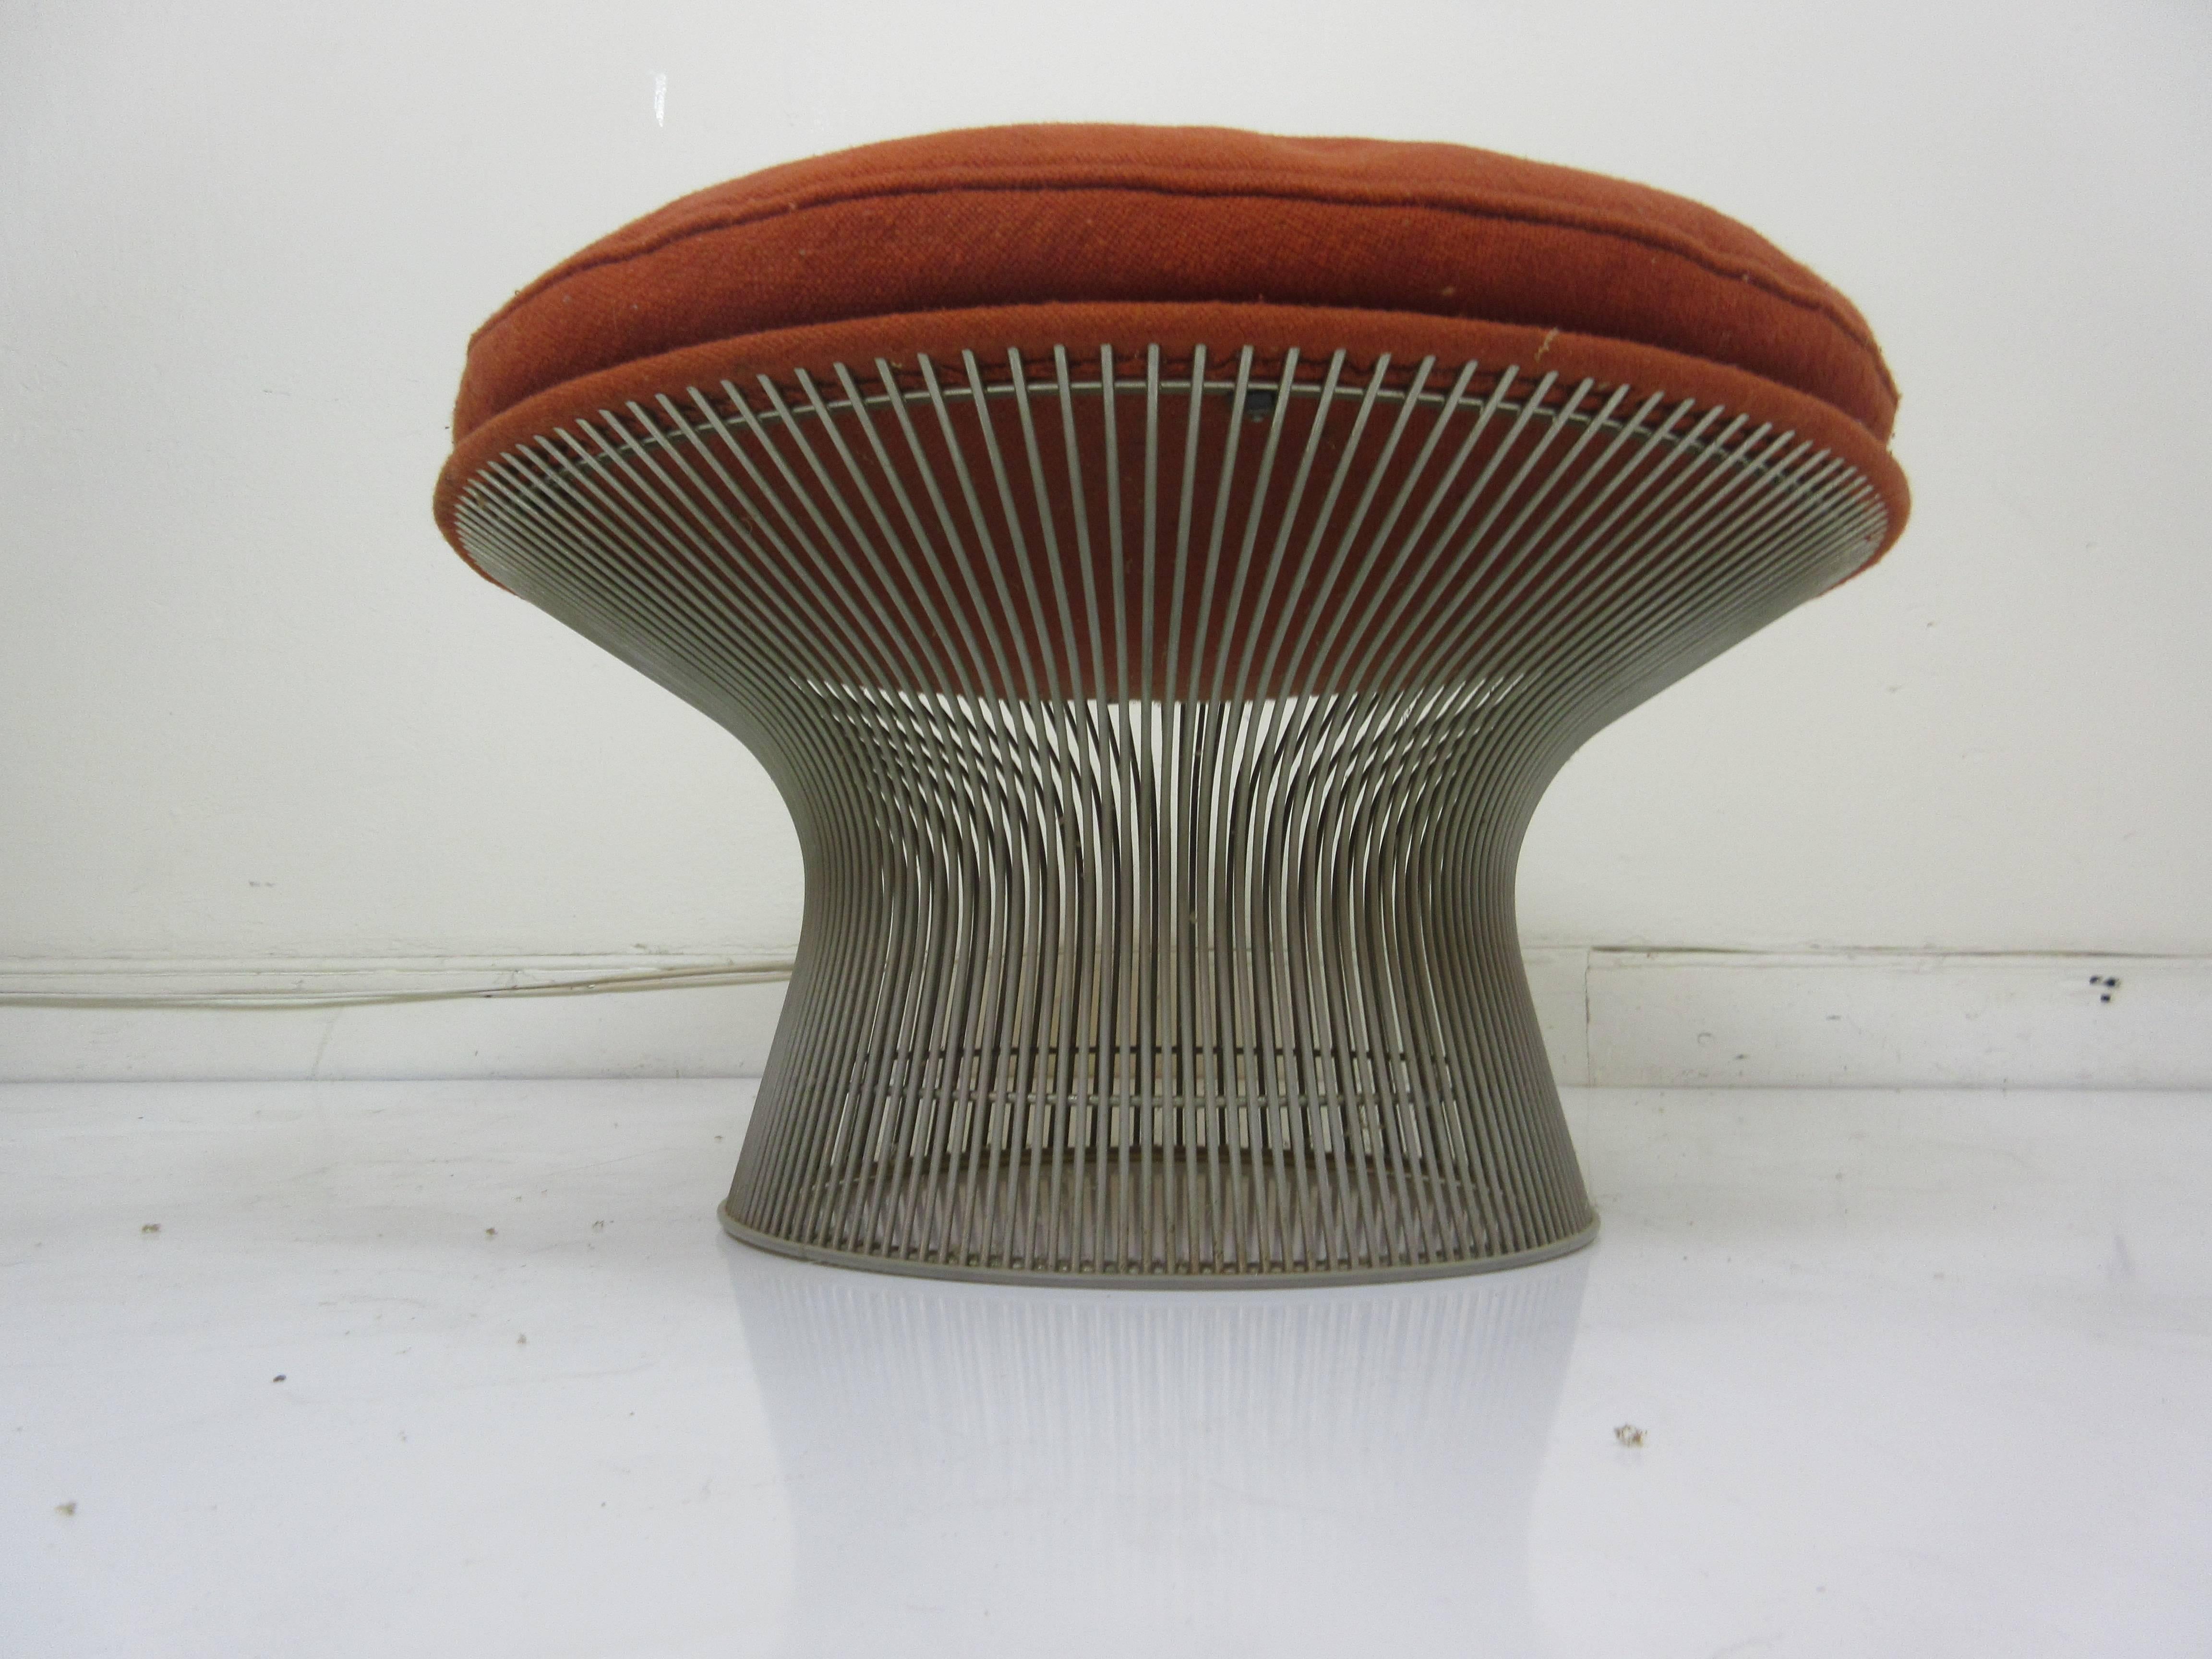 Warren Platner for Knoll International Ottoman in the nickel finish. All welds perfect and metal threads straight. Retains both its Knoll International label and plastic ring glide which is still pliable. Fabric is the original deep orange Knoll